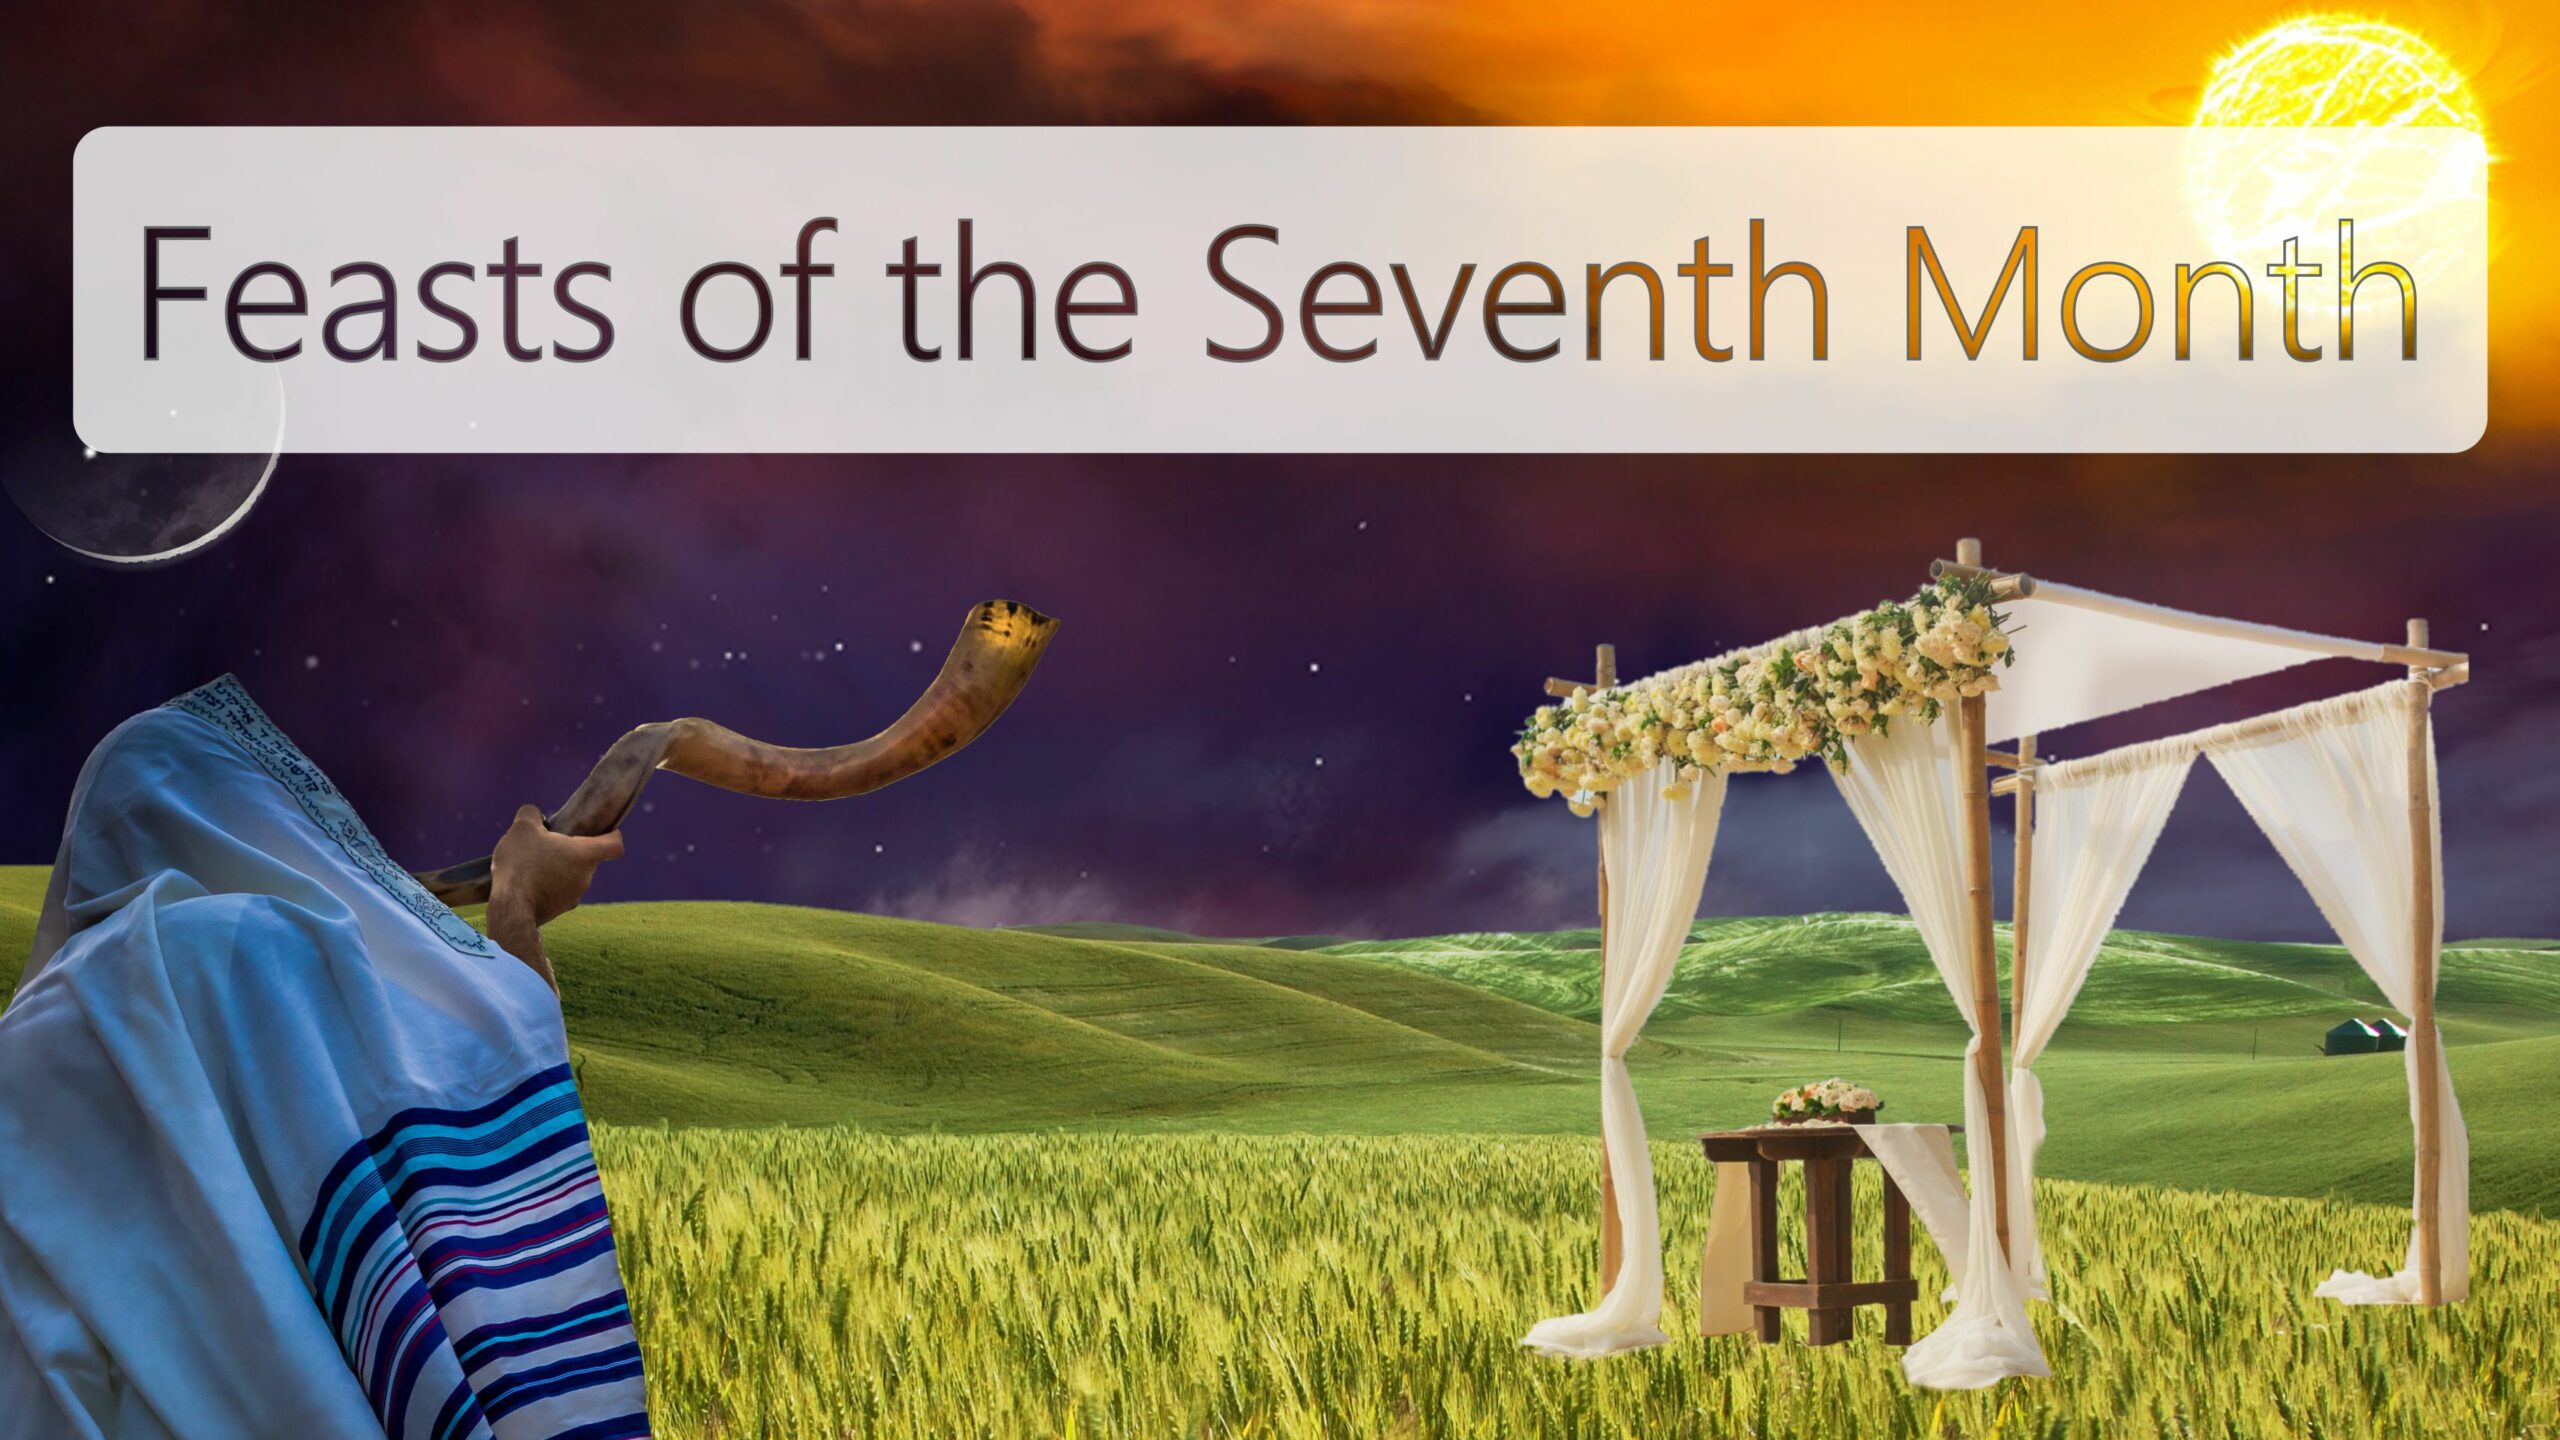 Feasts of the Seventh Month